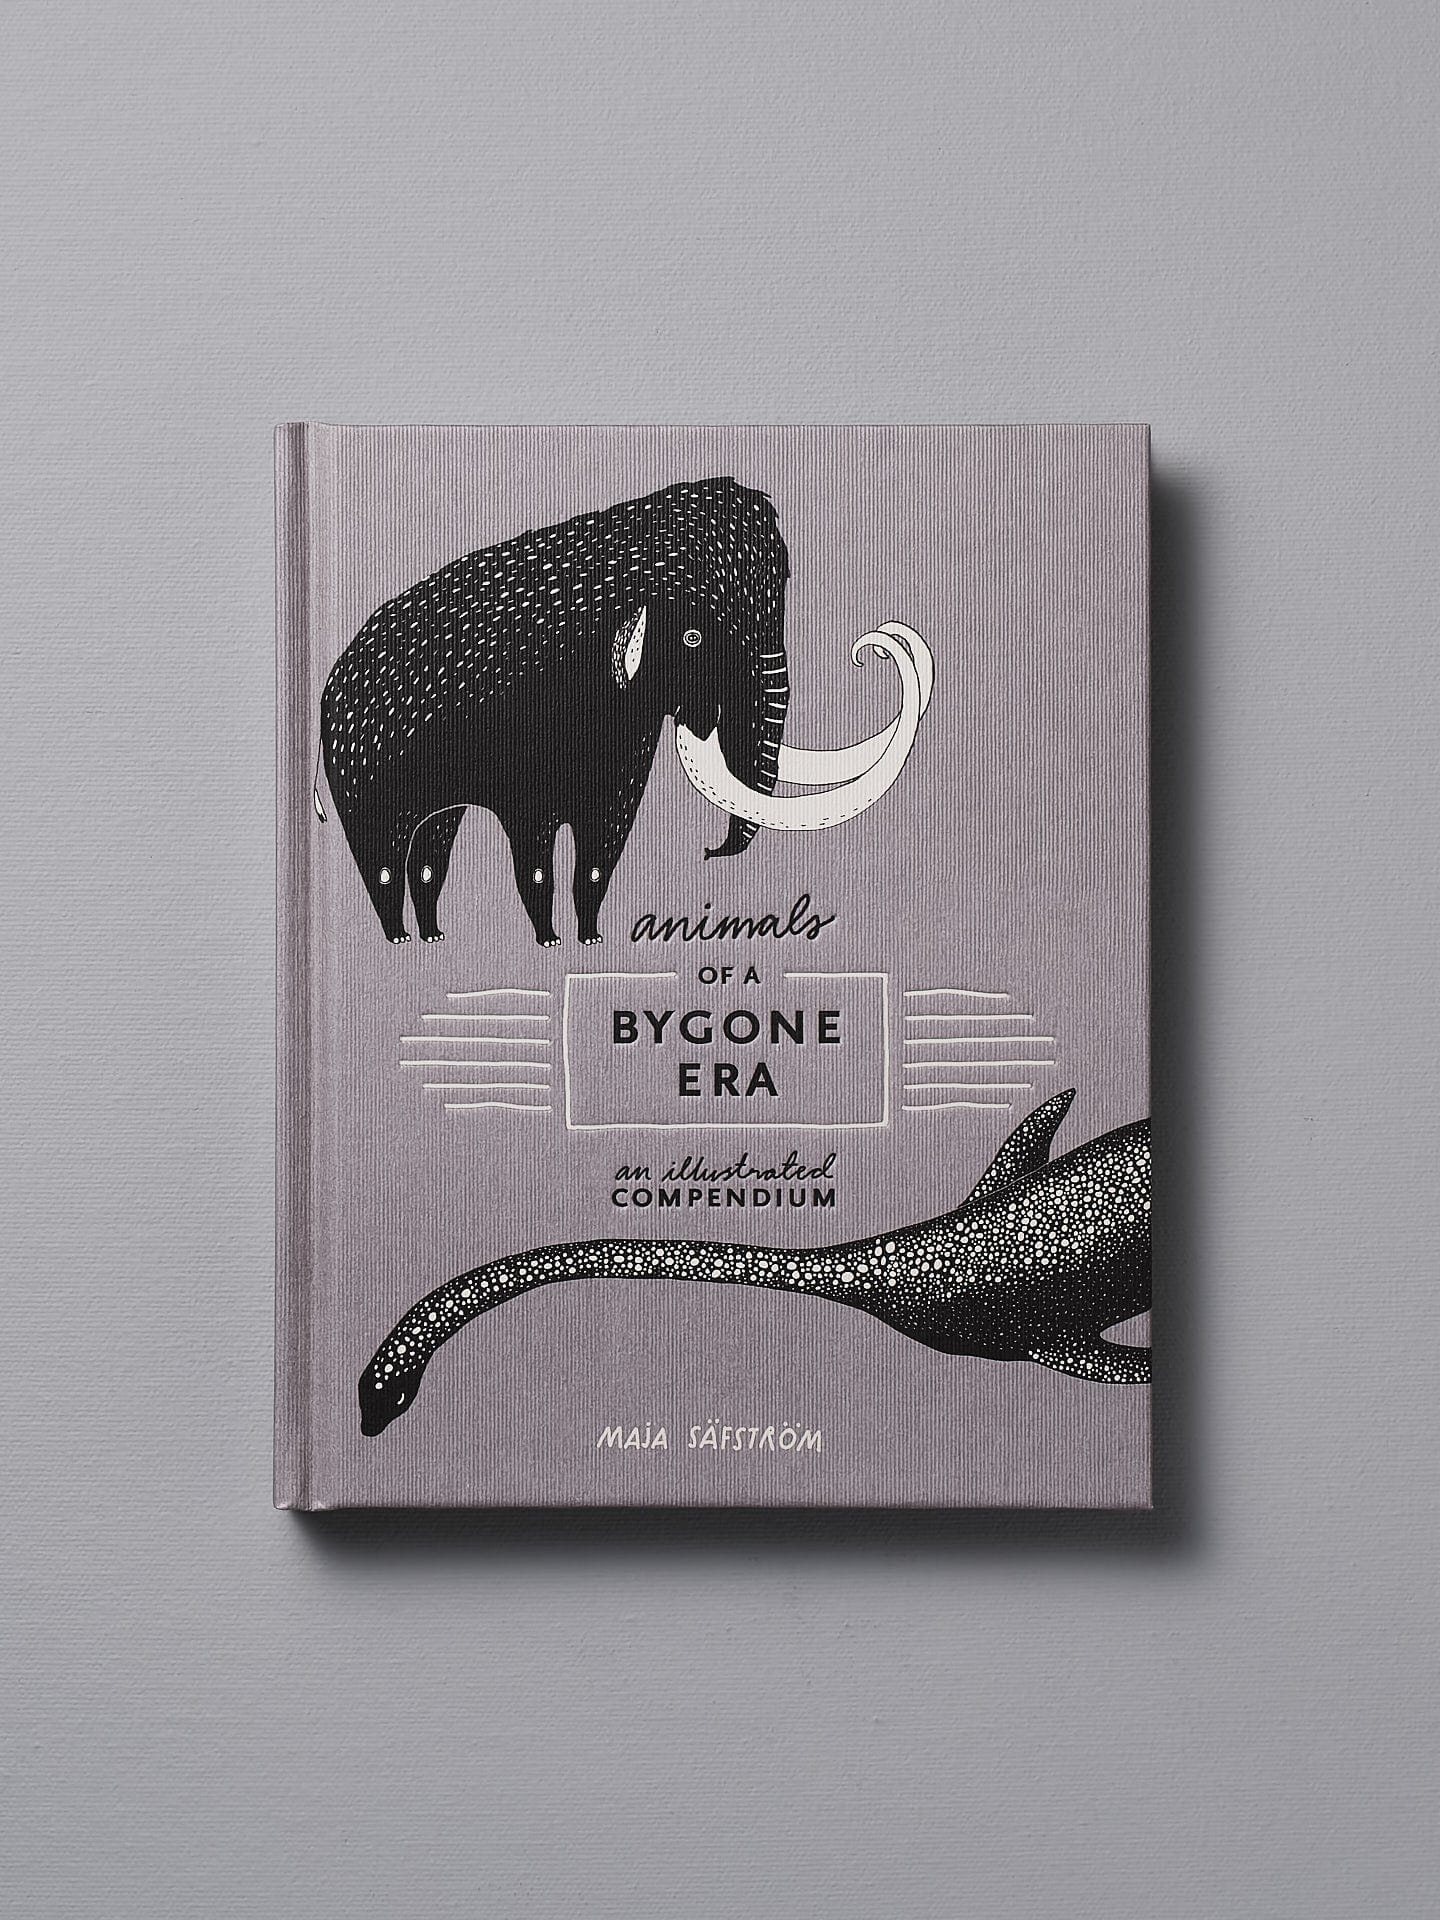 A Animals of a Bygone Era – An Illustrated Compendium with an elephant and a whale on it, by Maja Säfström.